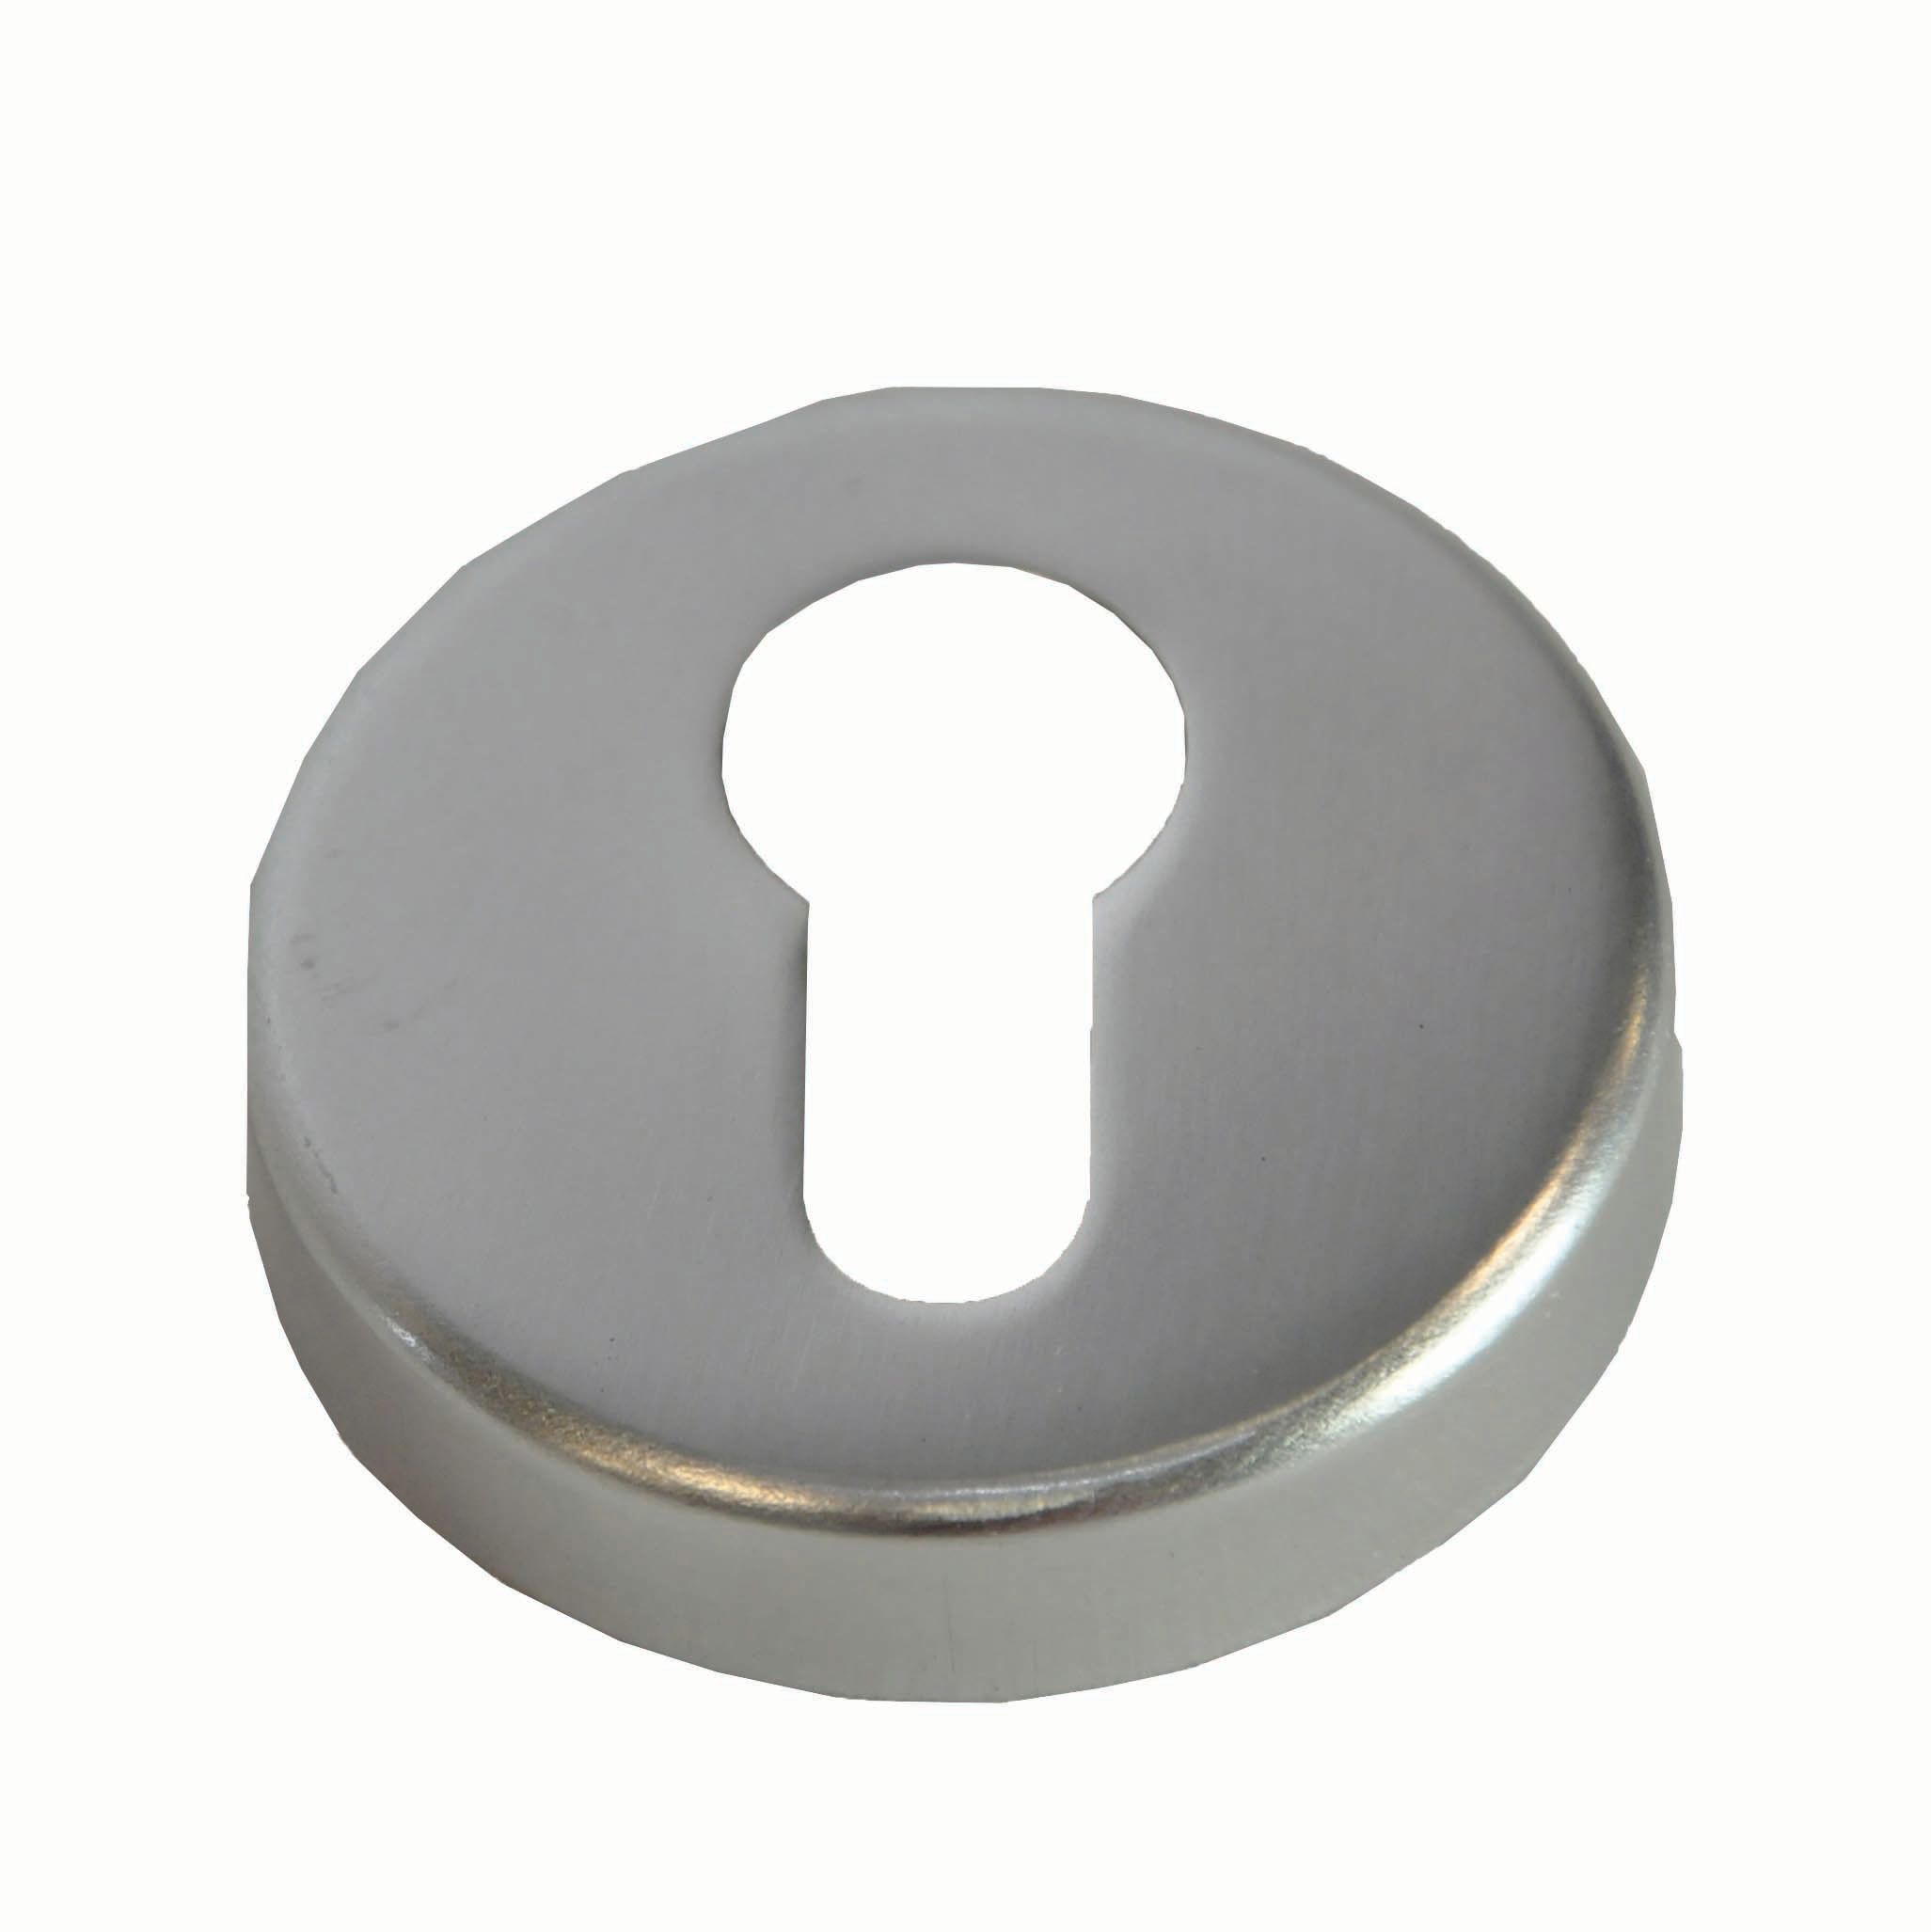 Image of 4FireDoors Euro Profile Escutcheon - Satin Stainless Steel Pack of 2